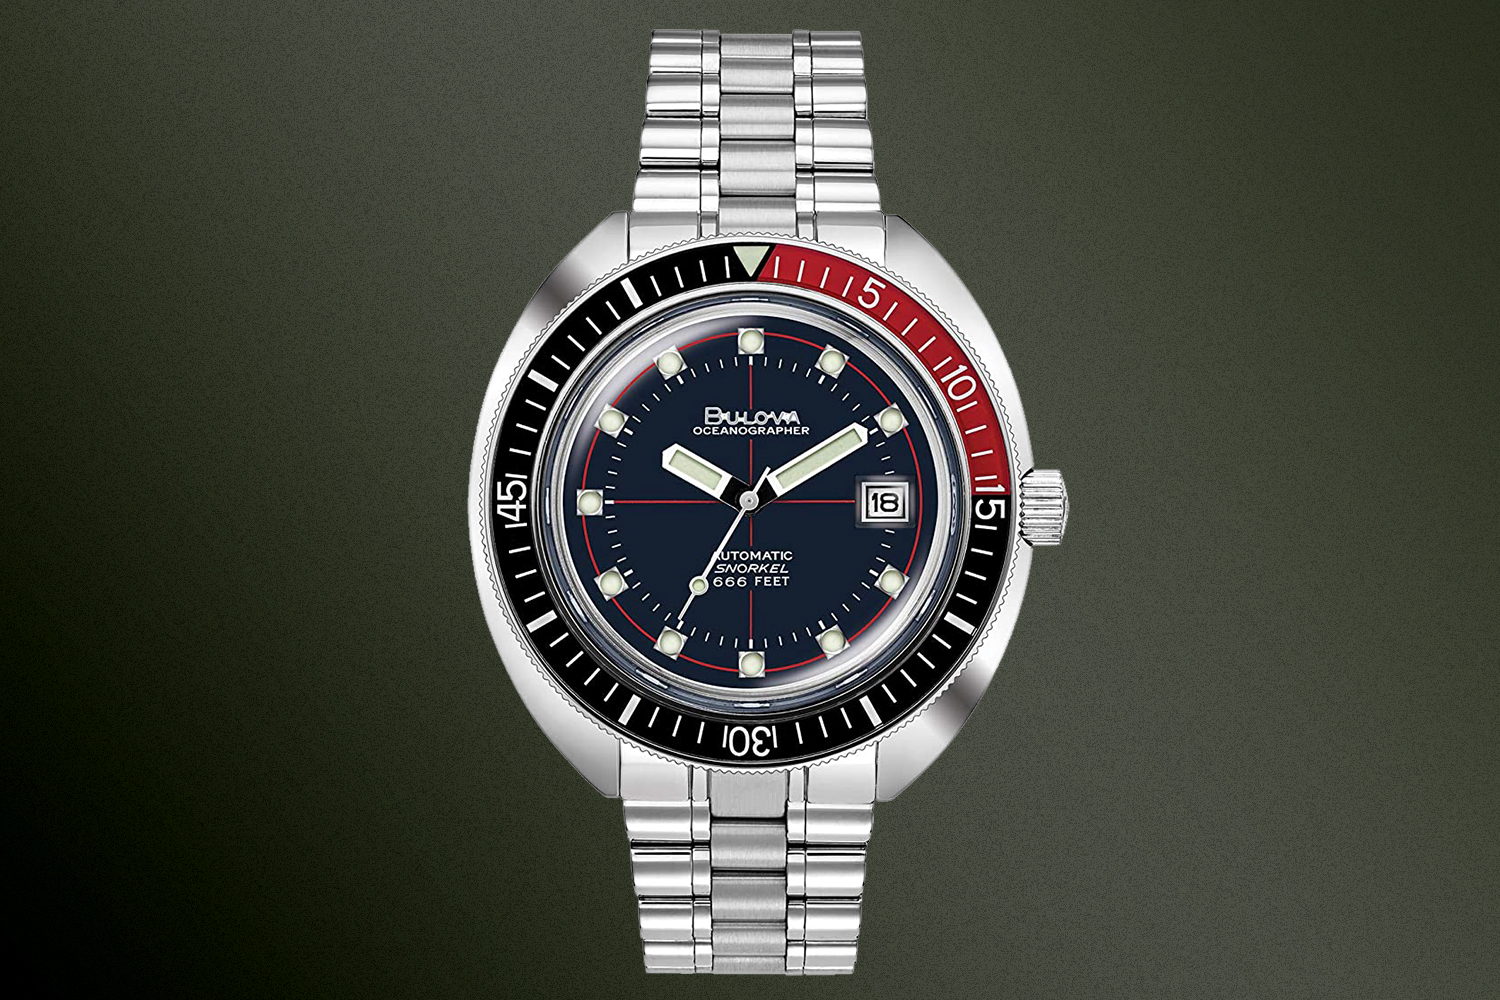 A Bulova Oceanographer Devil Diver watch in red and black on a green background